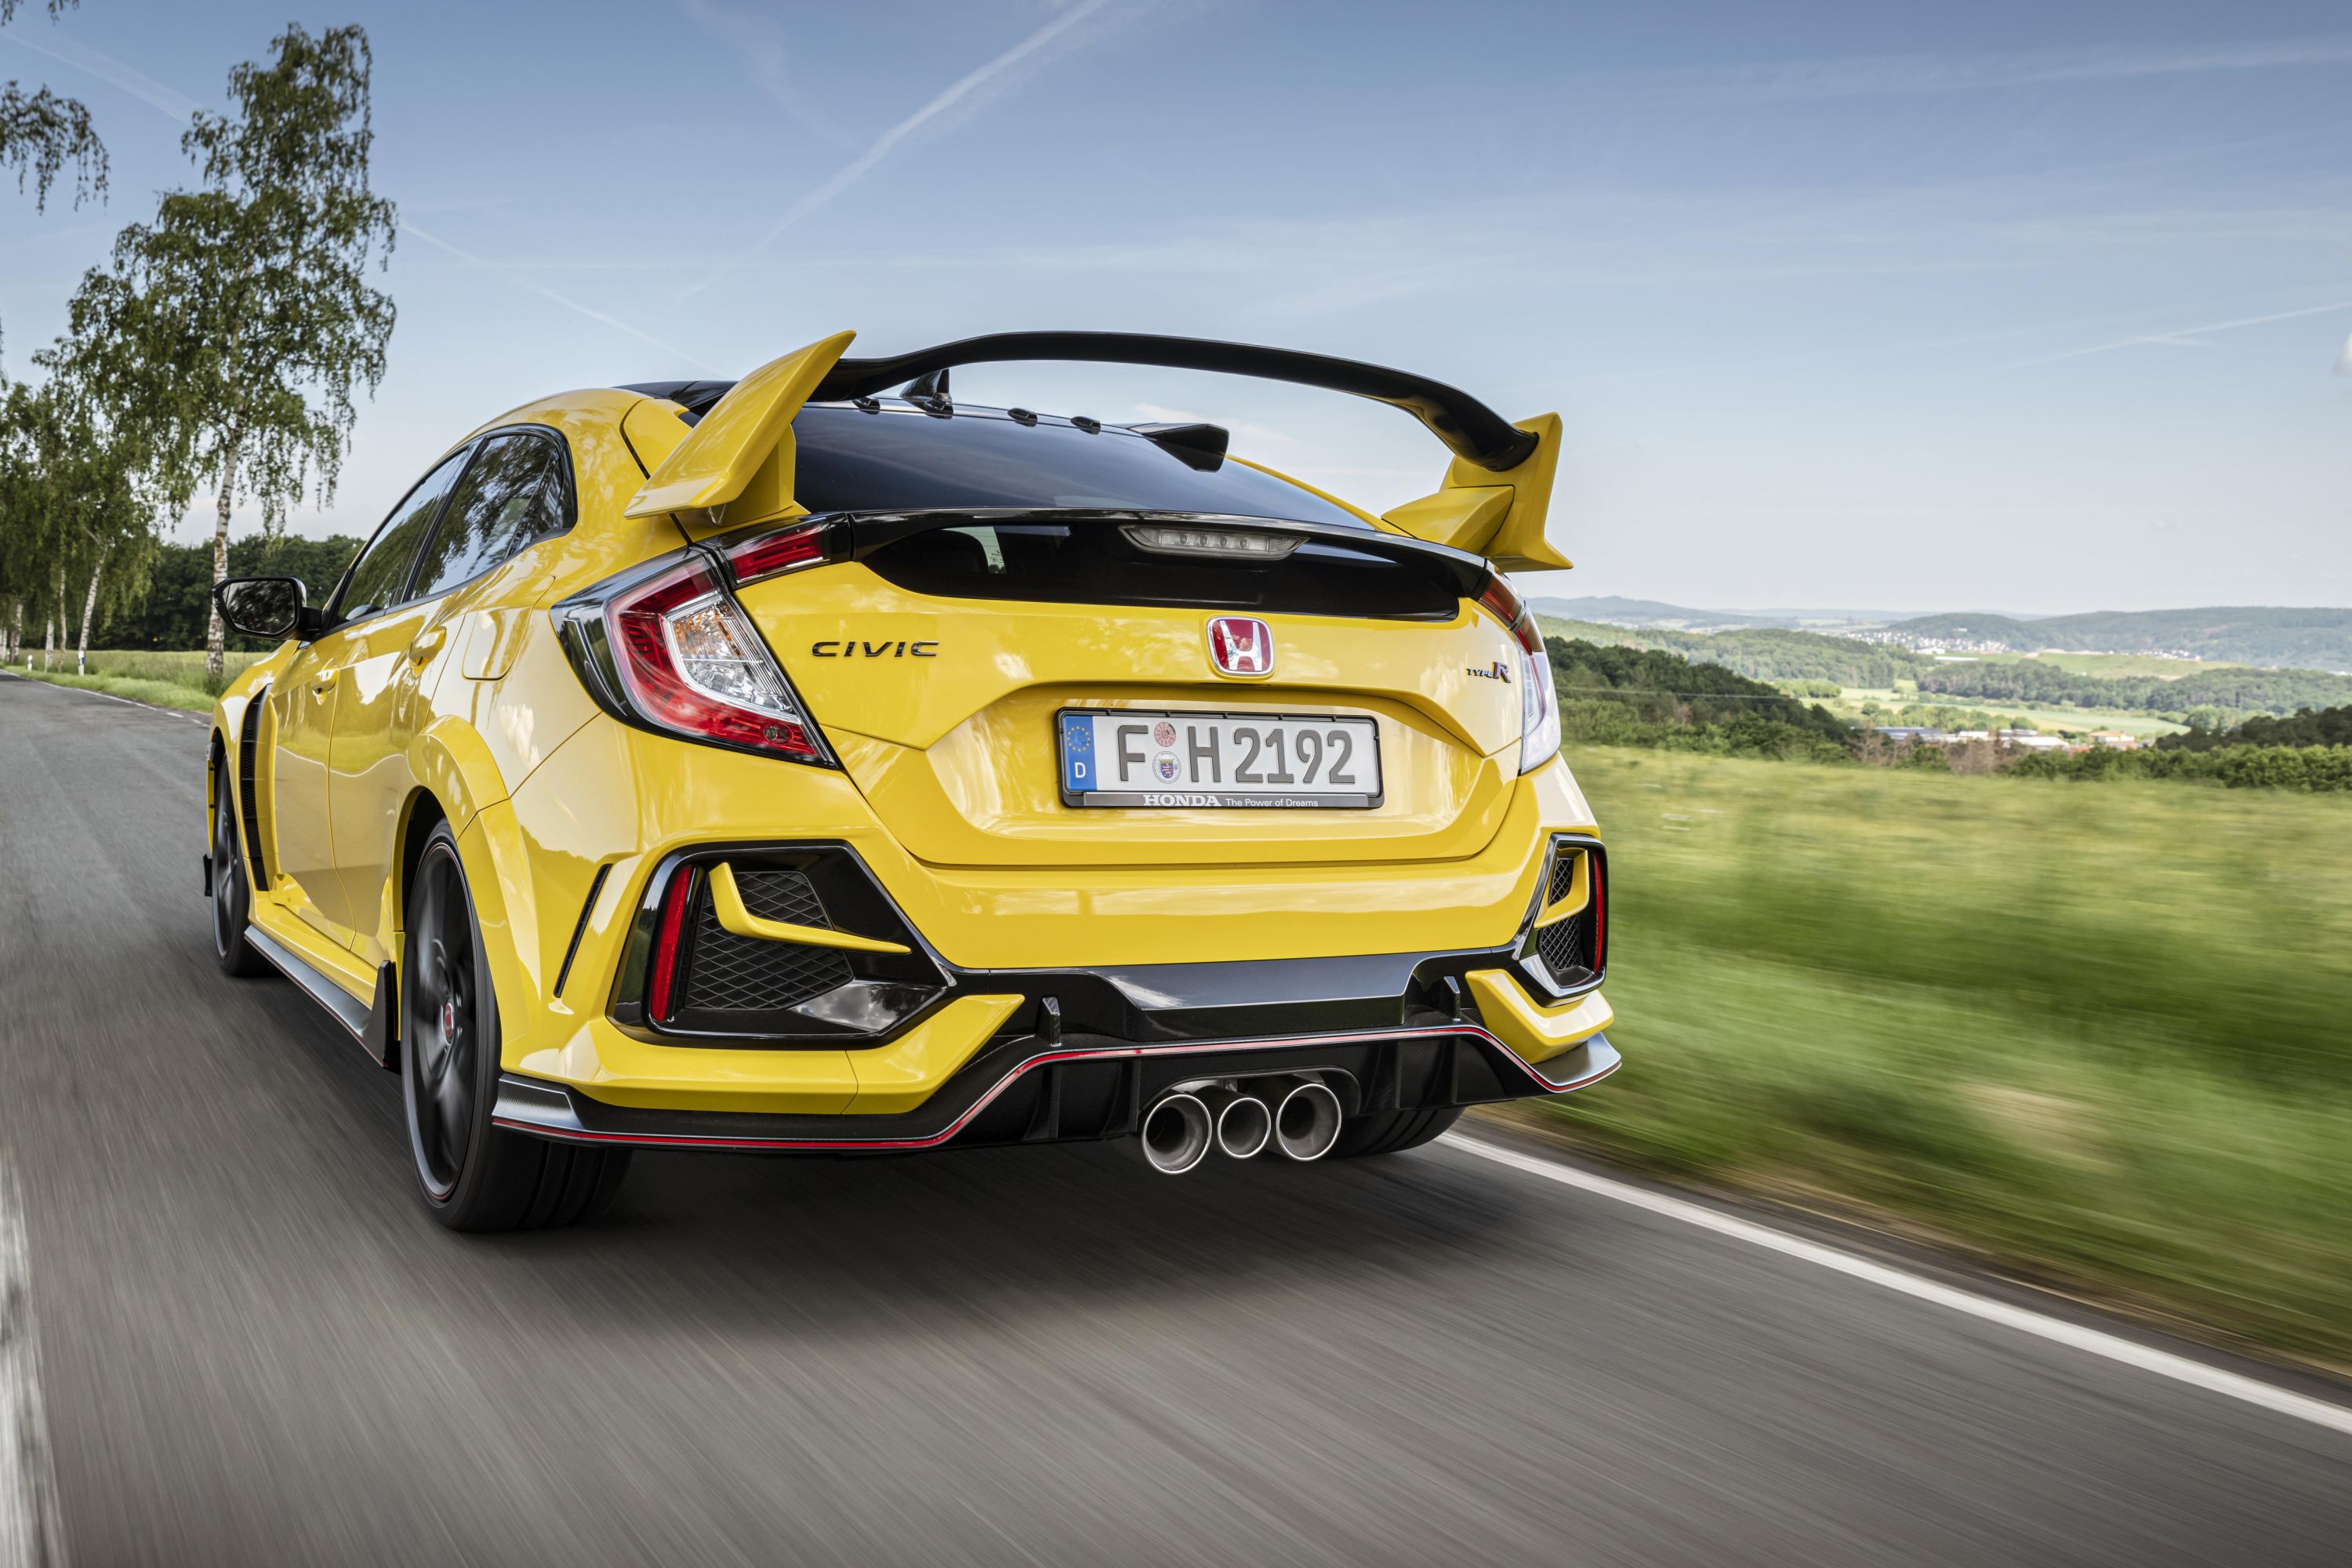 2021 Honda Civic Type R Limited Edition: $70,000 hot hatch to be sold